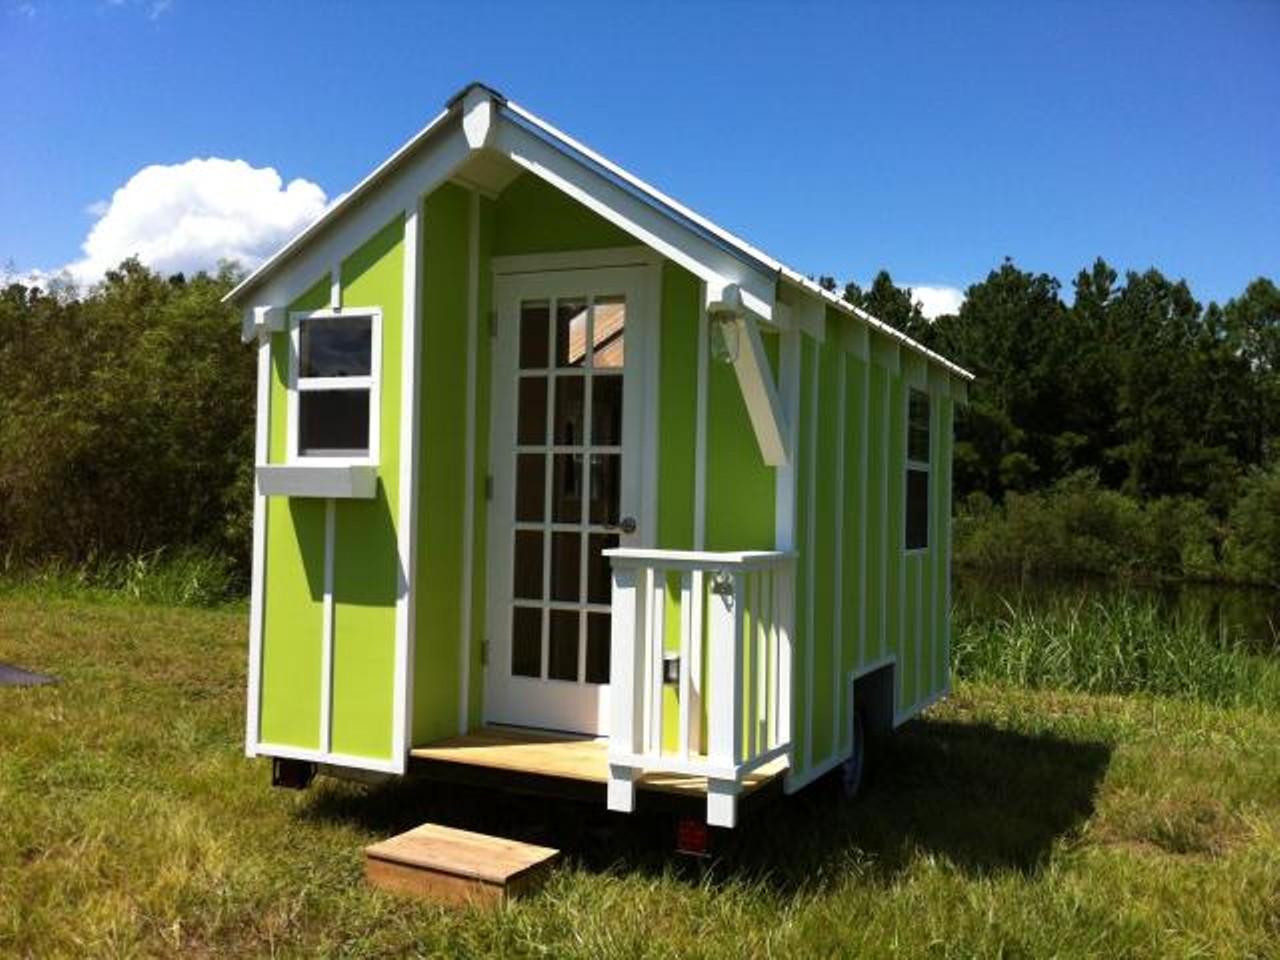 The 72 SF Tiny House
Location: Eustis
Price: $16999
Size: 72 sq ft 
The lime green paint job is fun.